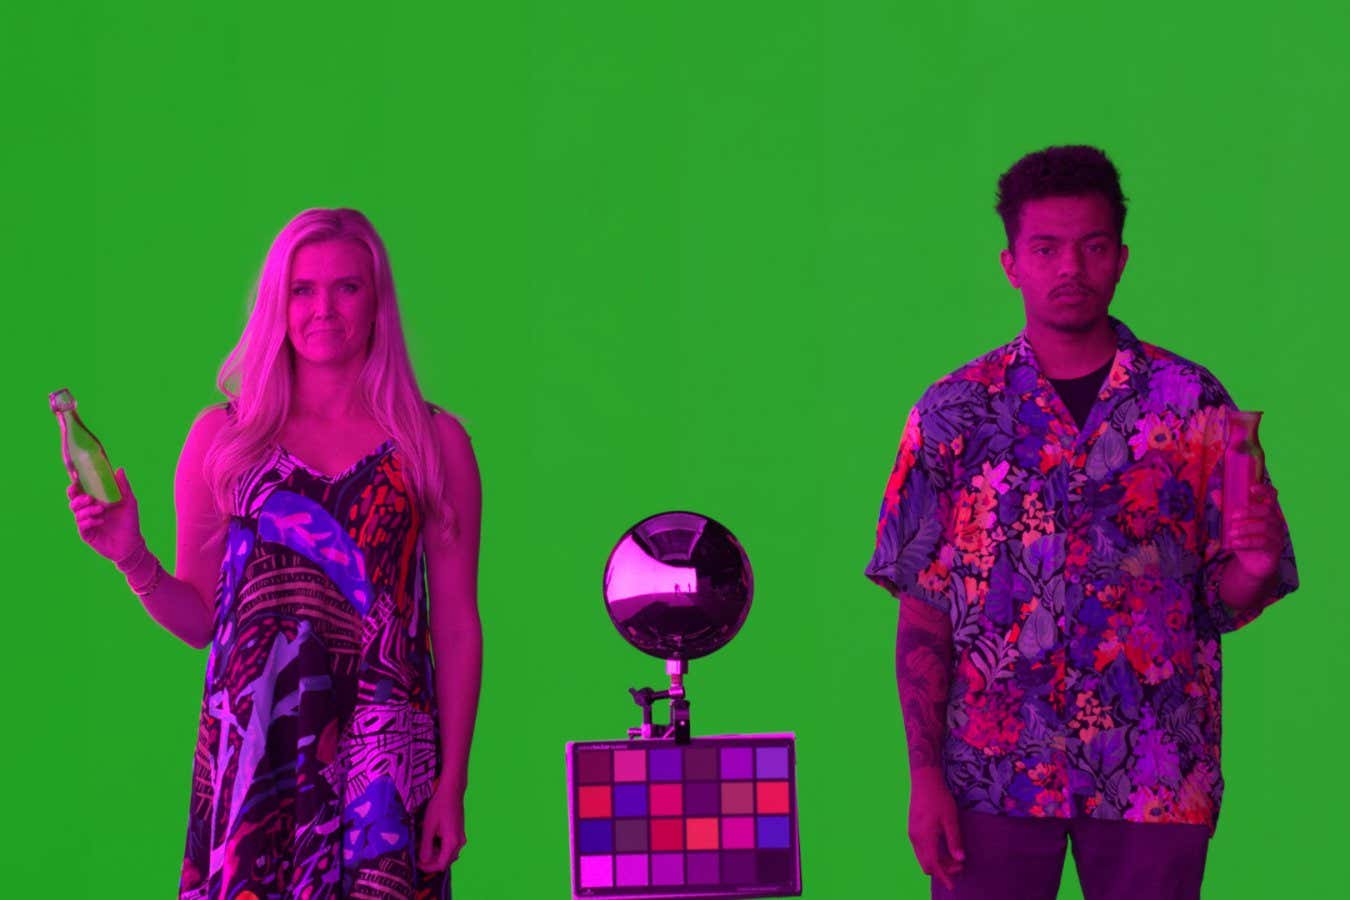 Netflix invents new filming method for green screen with magenta light